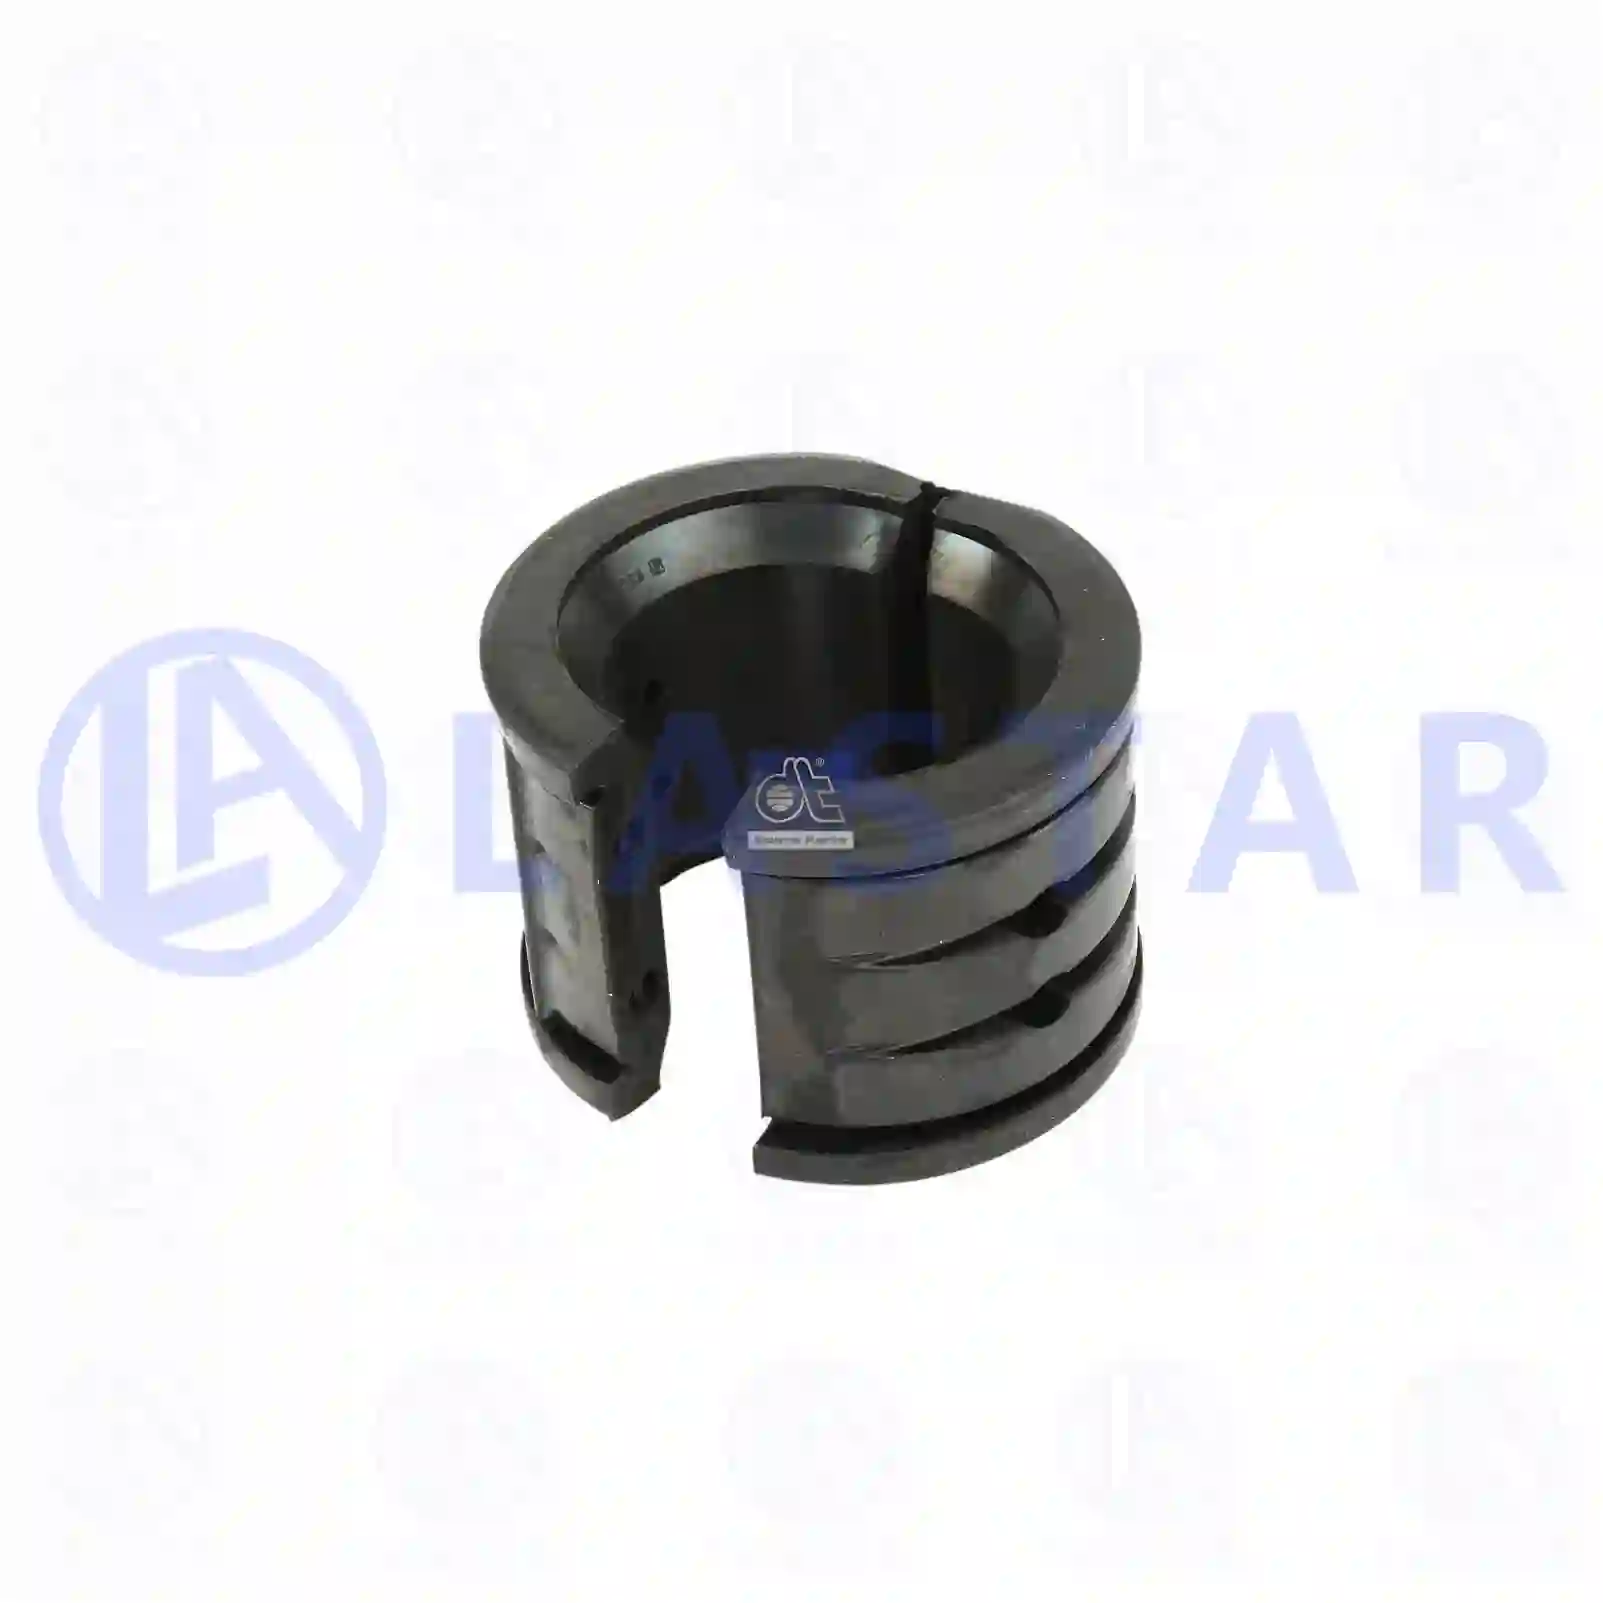 Bushing, stabilizer, 77727247, 1077594, , , ||  77727247 Lastar Spare Part | Truck Spare Parts, Auotomotive Spare Parts Bushing, stabilizer, 77727247, 1077594, , , ||  77727247 Lastar Spare Part | Truck Spare Parts, Auotomotive Spare Parts